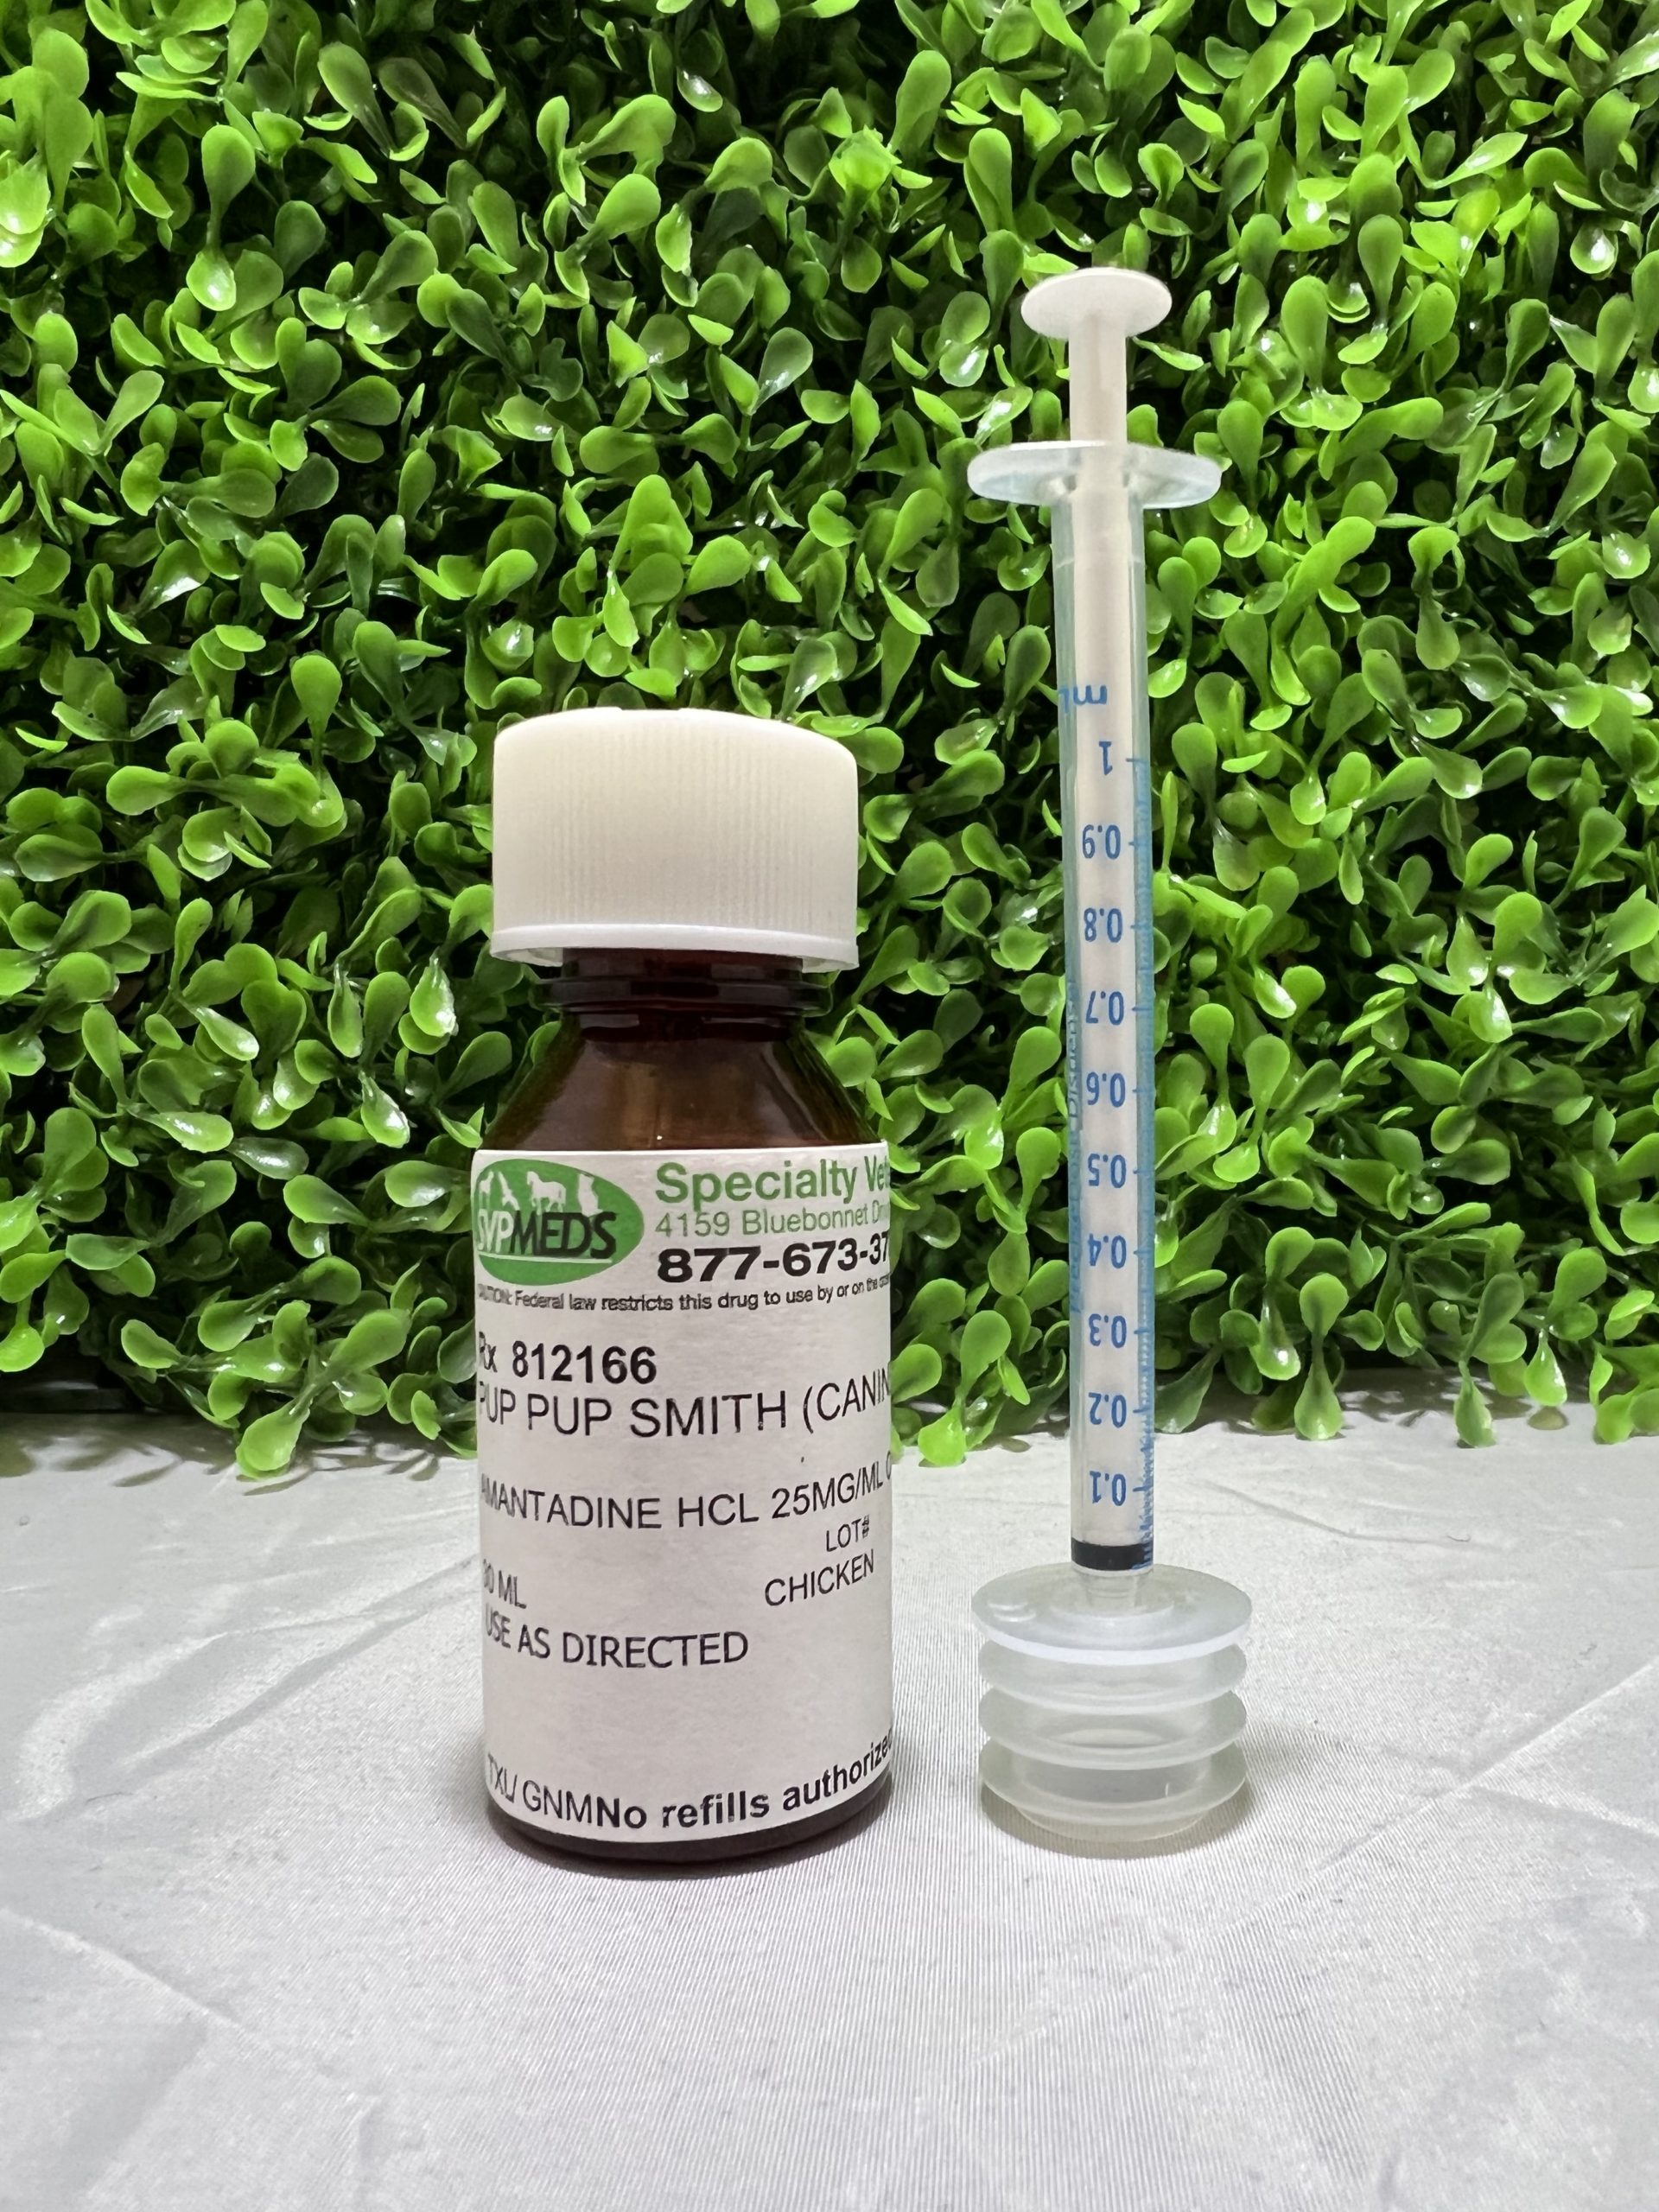 Amantadine HCl Oral Liquid compounded for dogs and cats.